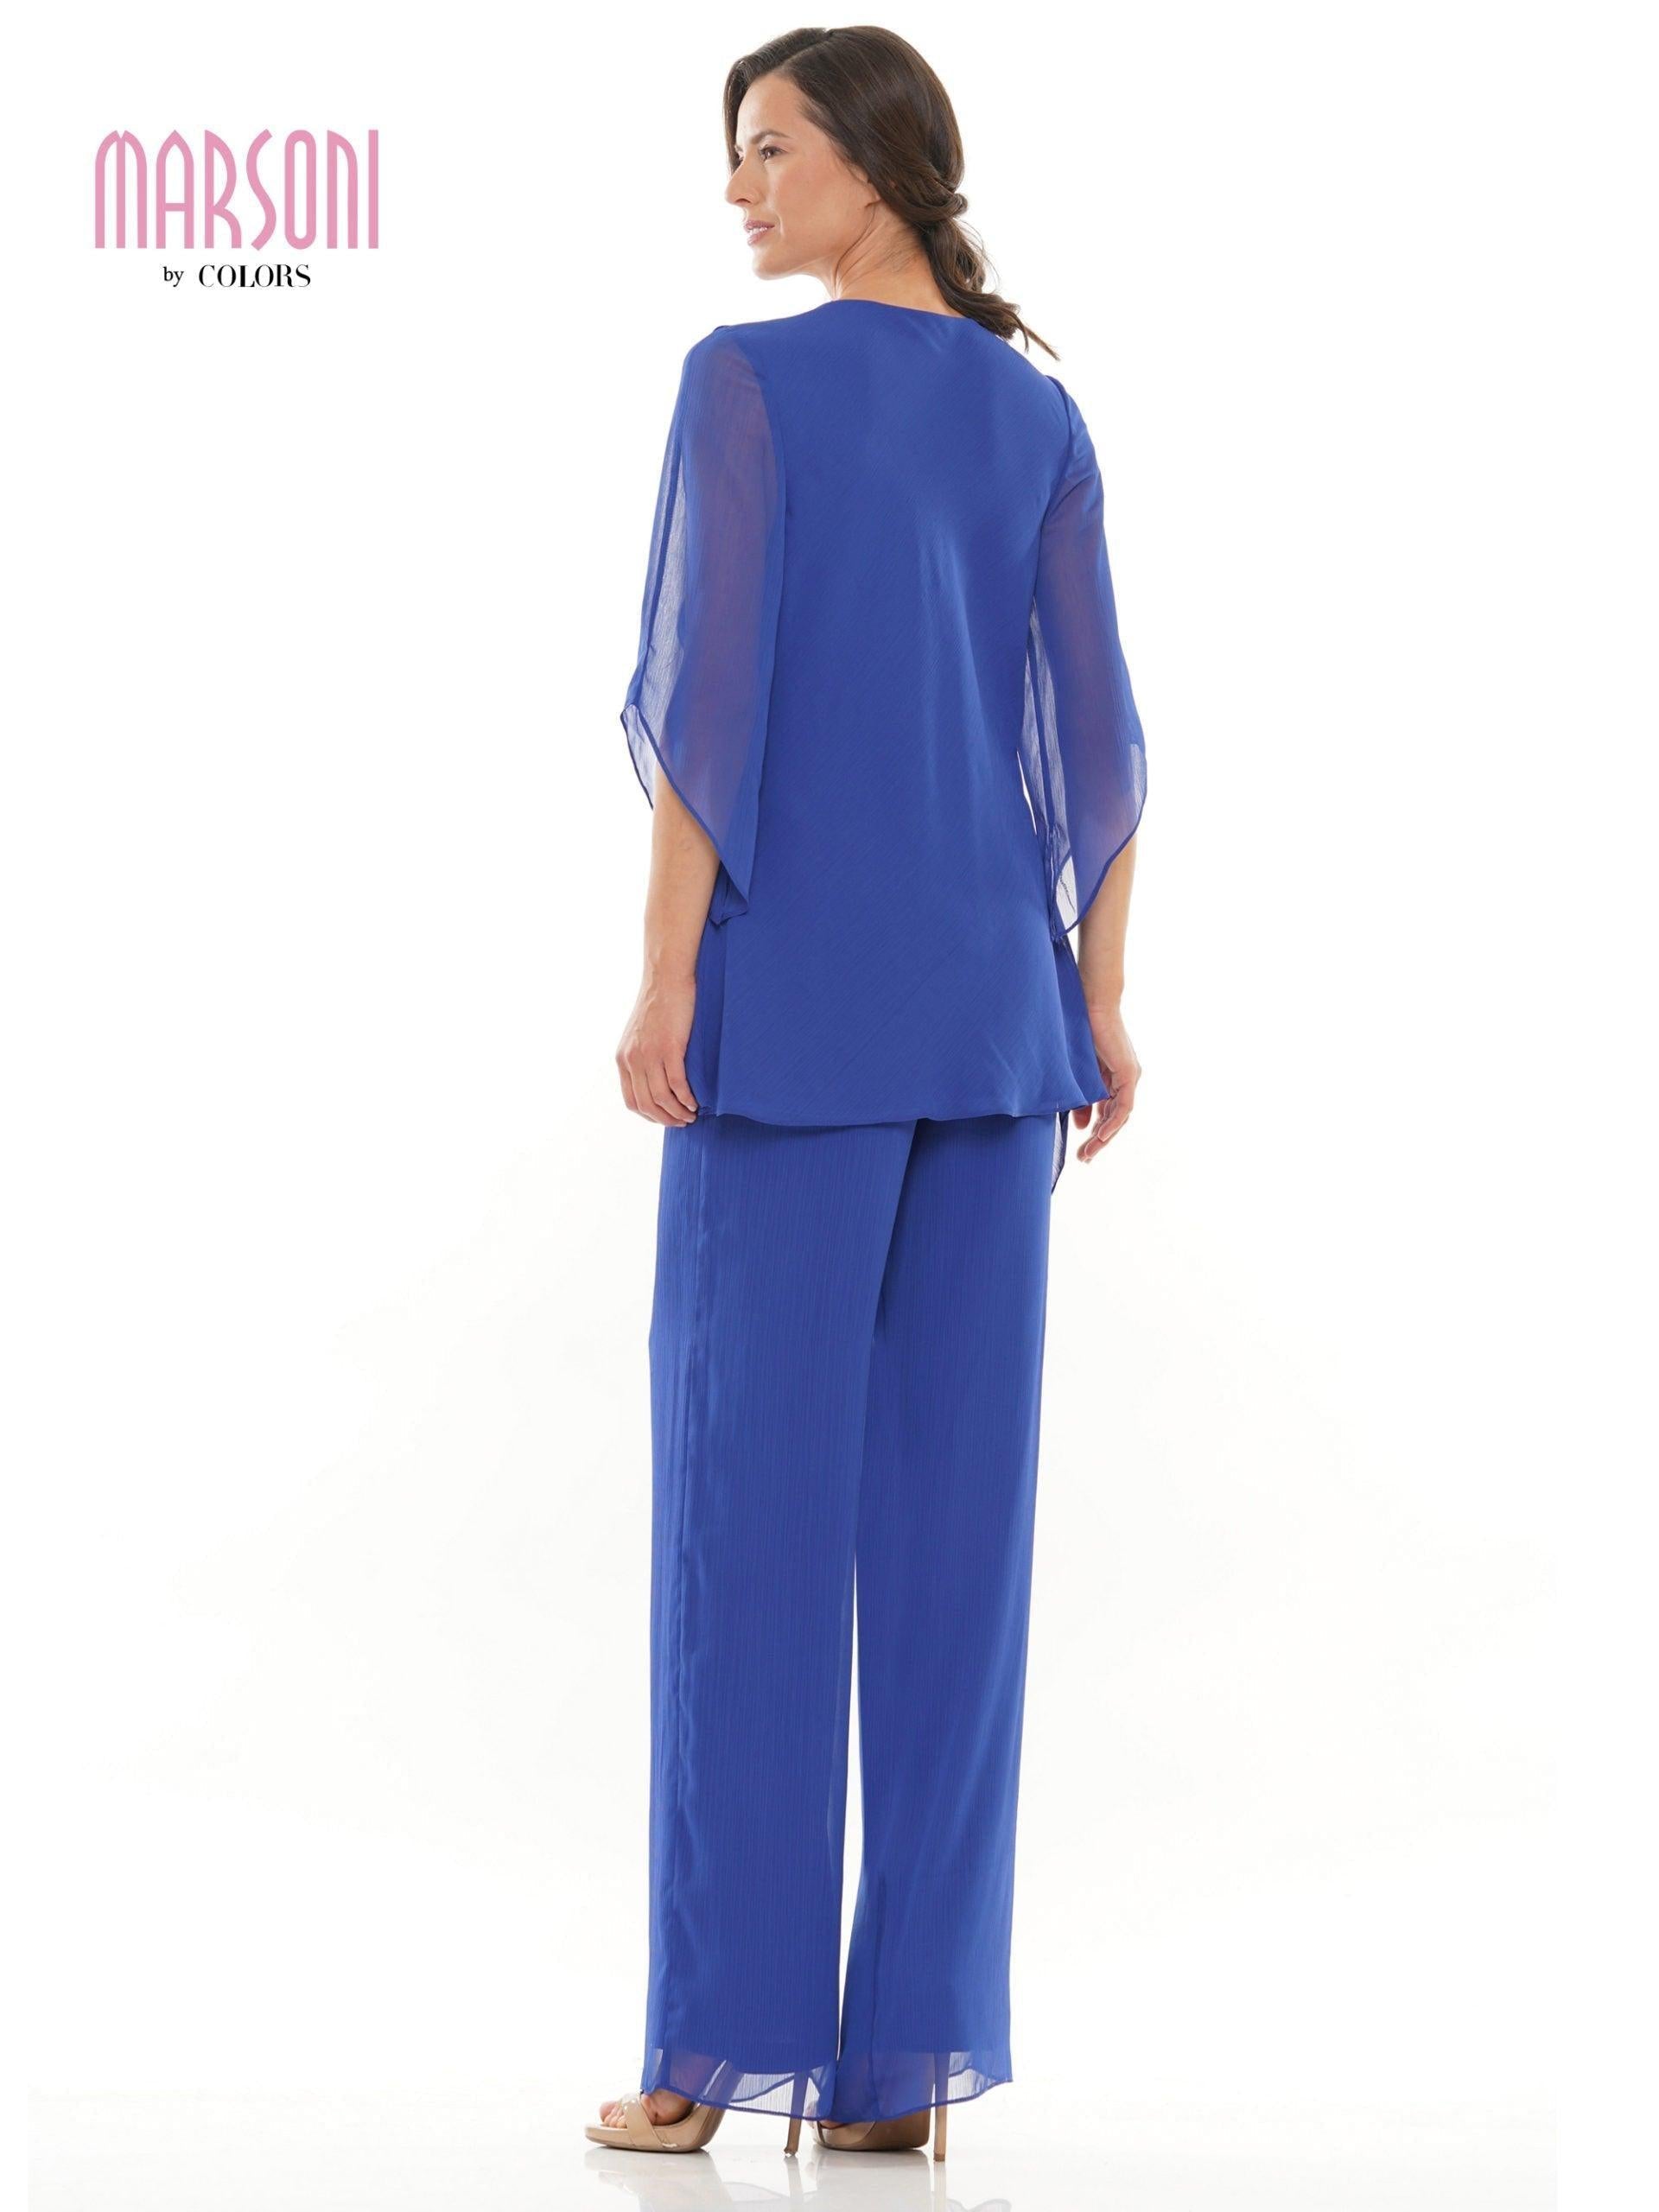 Marsoni Formal Mother of the Bride Pant Suit 308 Sale - The Dress Outlet